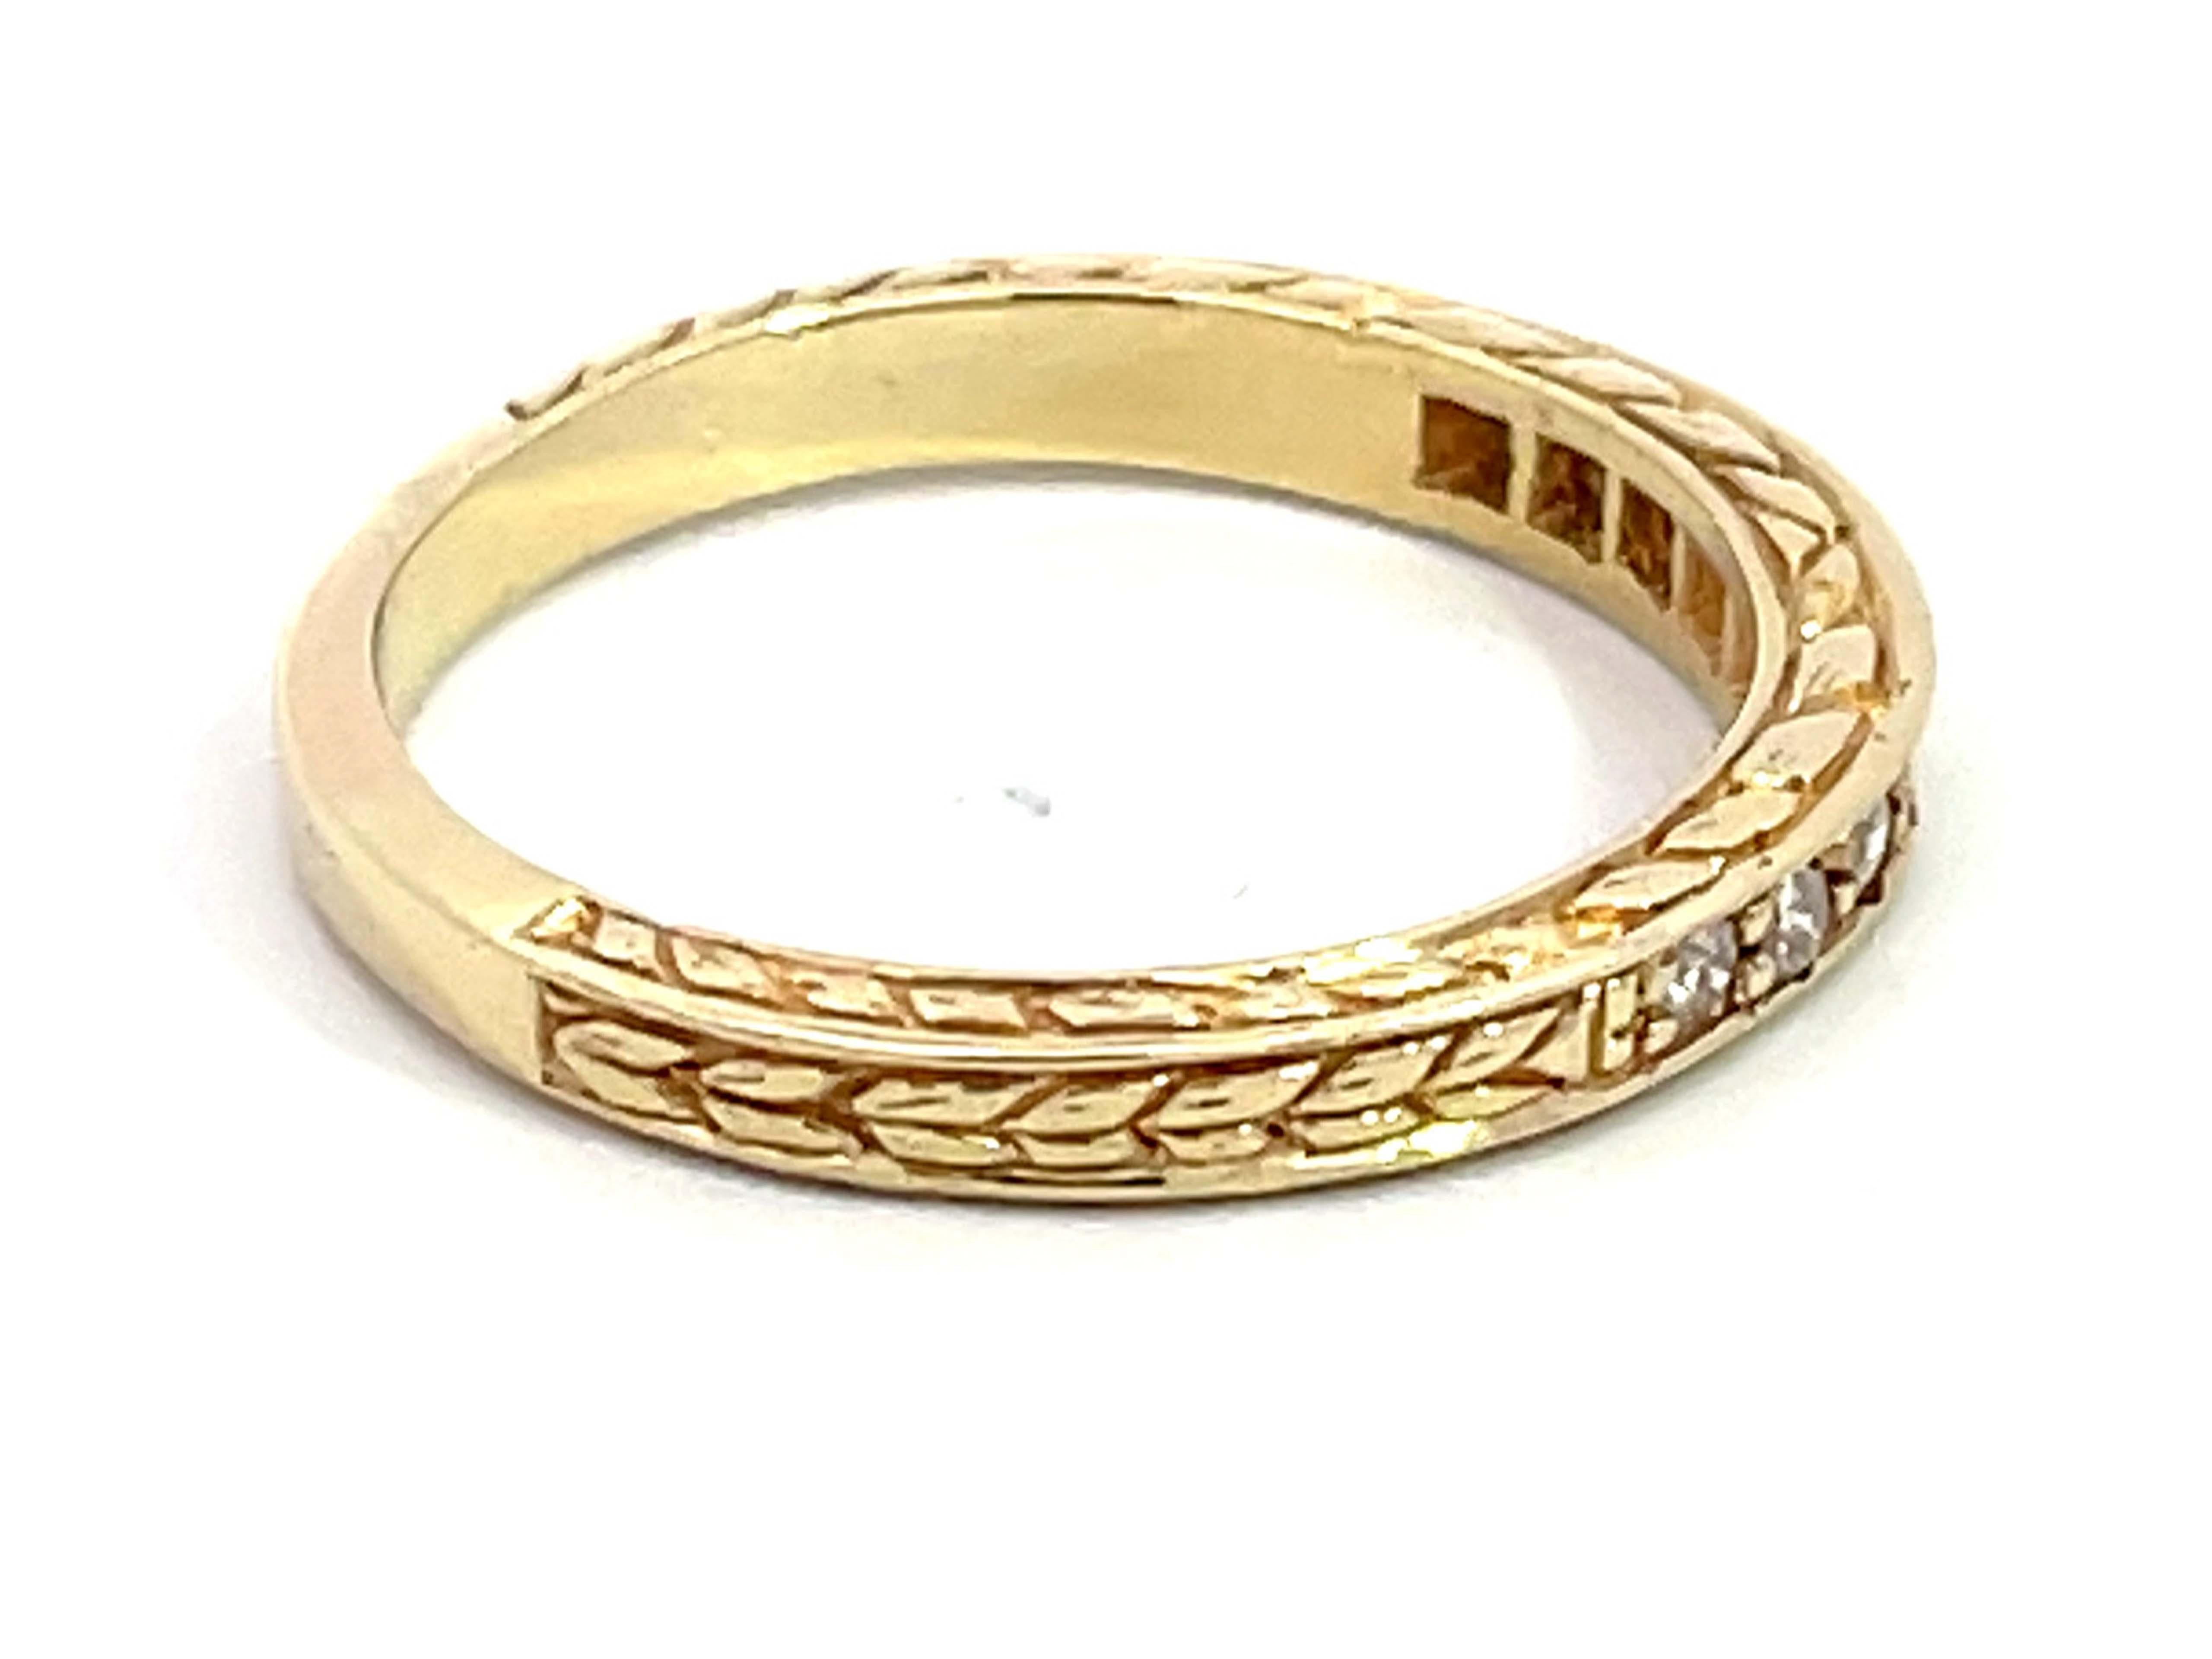 Brilliant Cut 9 Diamond Band Ring in 14k Yellow Gold For Sale